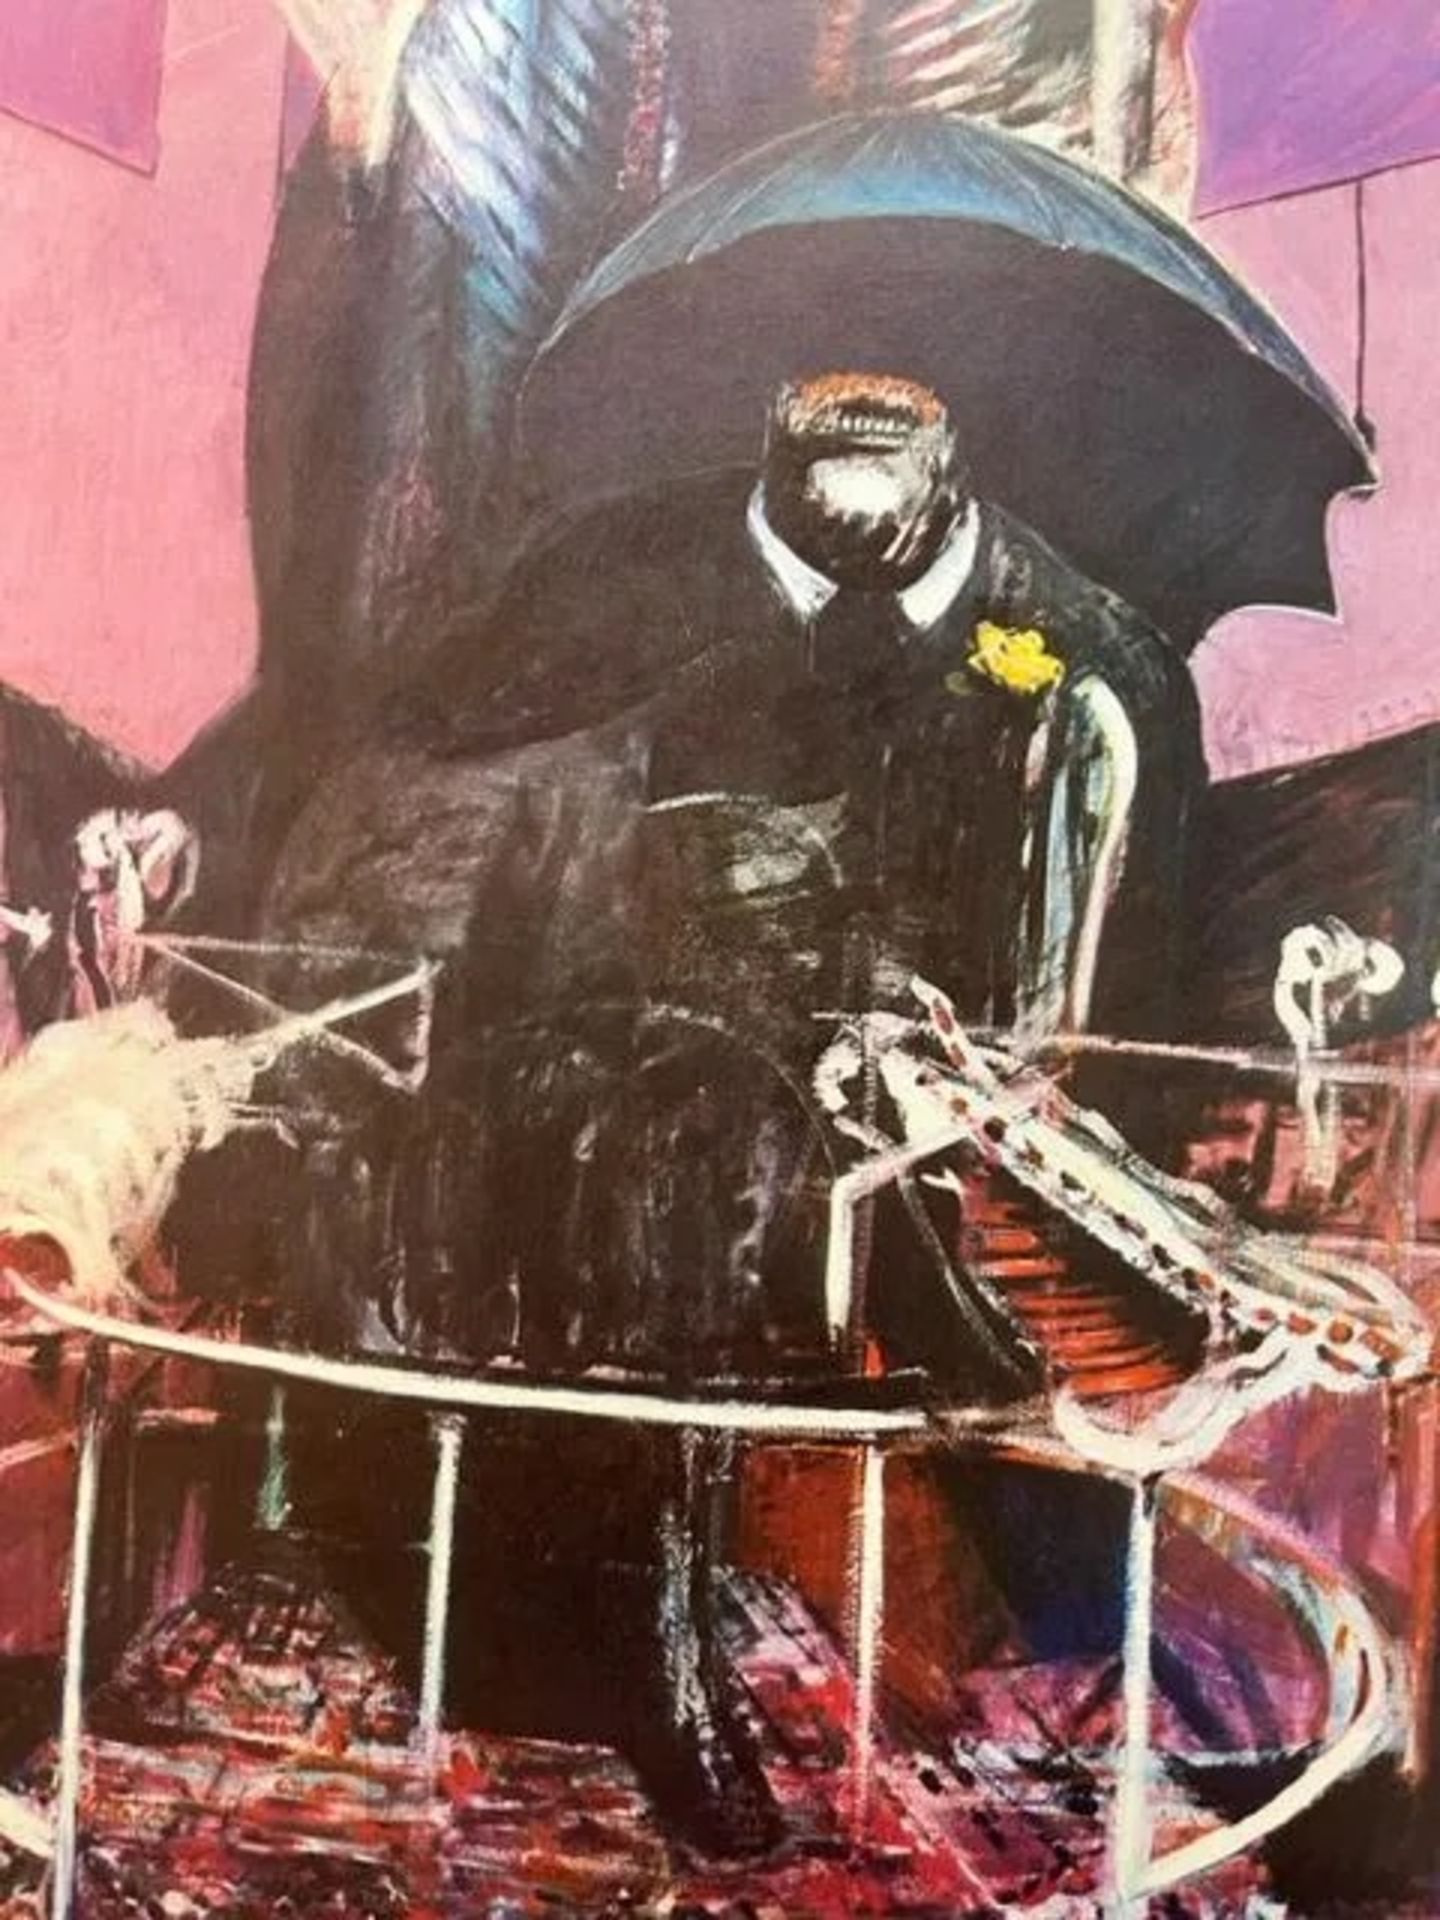 Francis Bacon "Pink Crucifiction" Print - Image 5 of 6